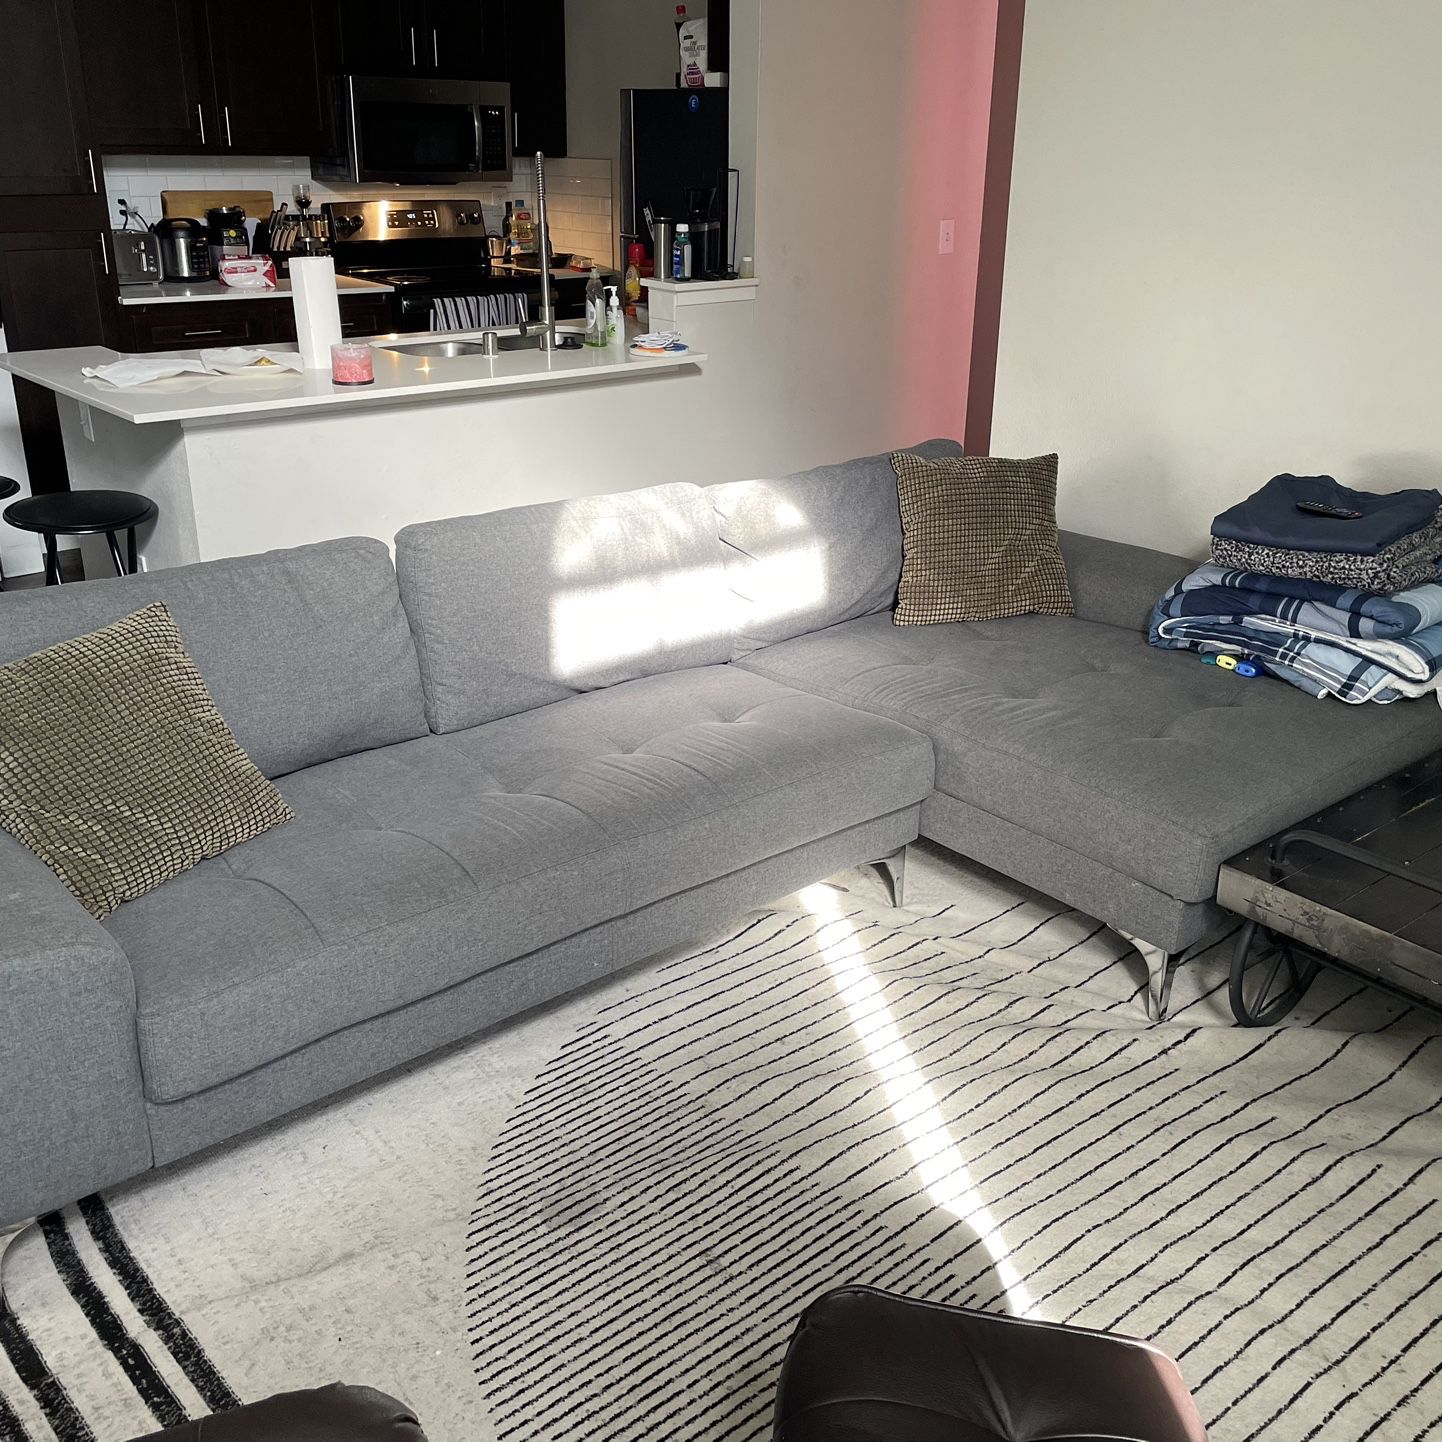 Grey L-shaped Couch